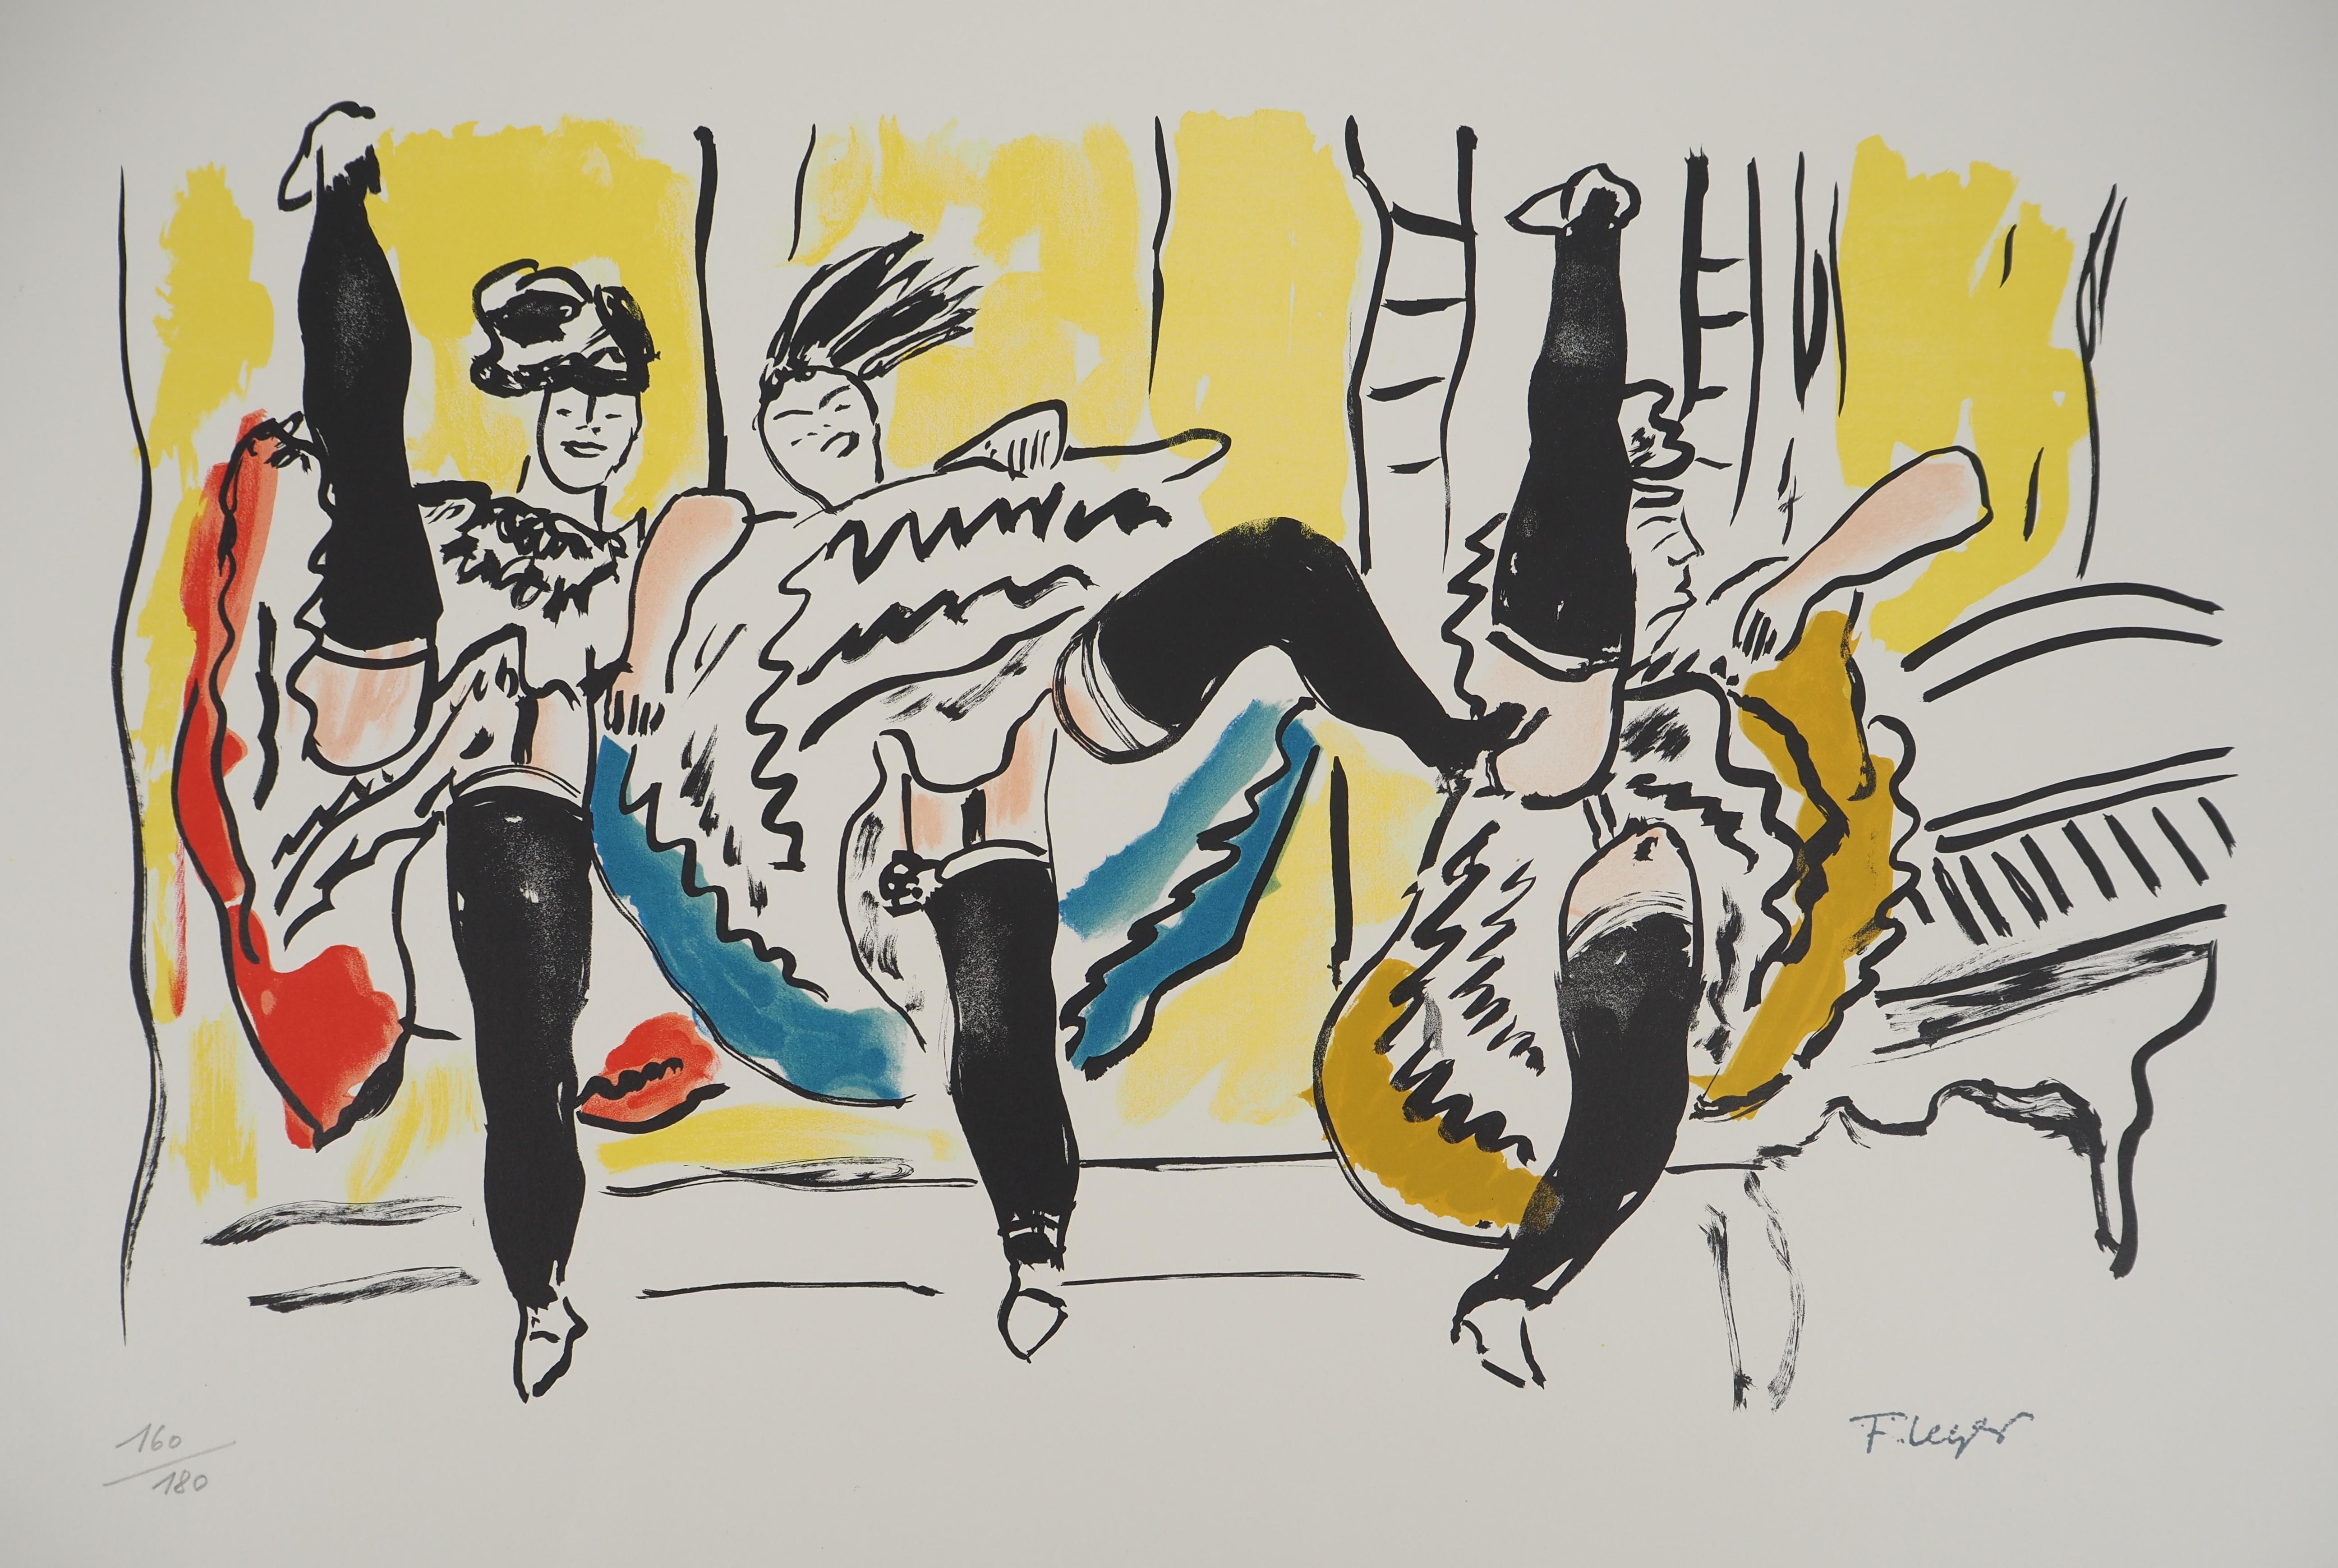 The city, The Moulin Rouge - Original lithograph, HANDSIGNED, 1959 - Modern Print by Fernand Léger